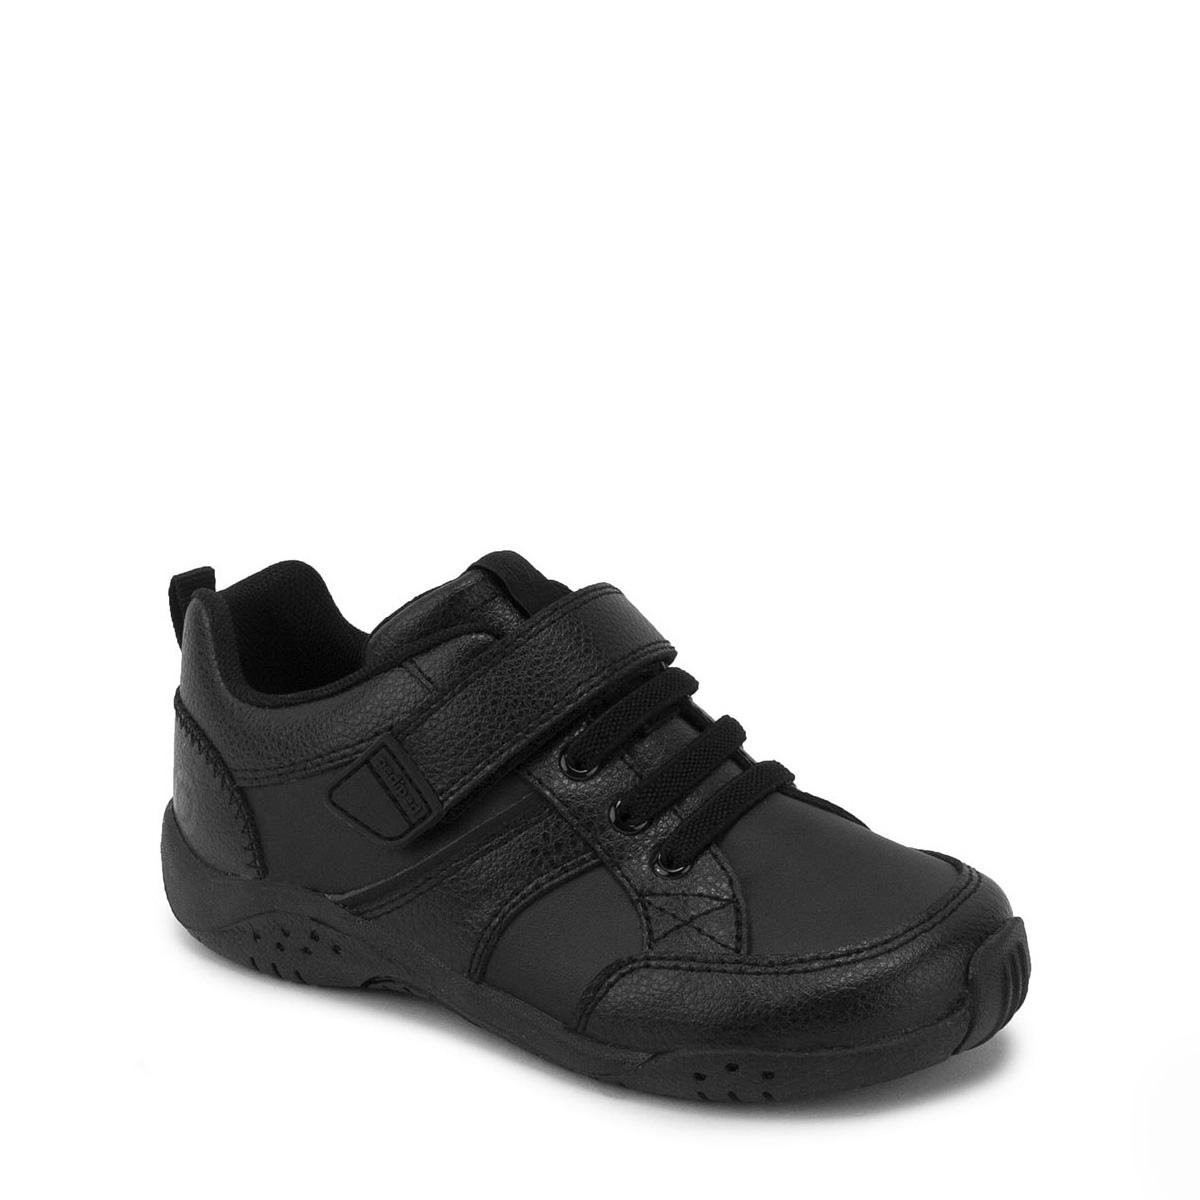 justice kids shoes